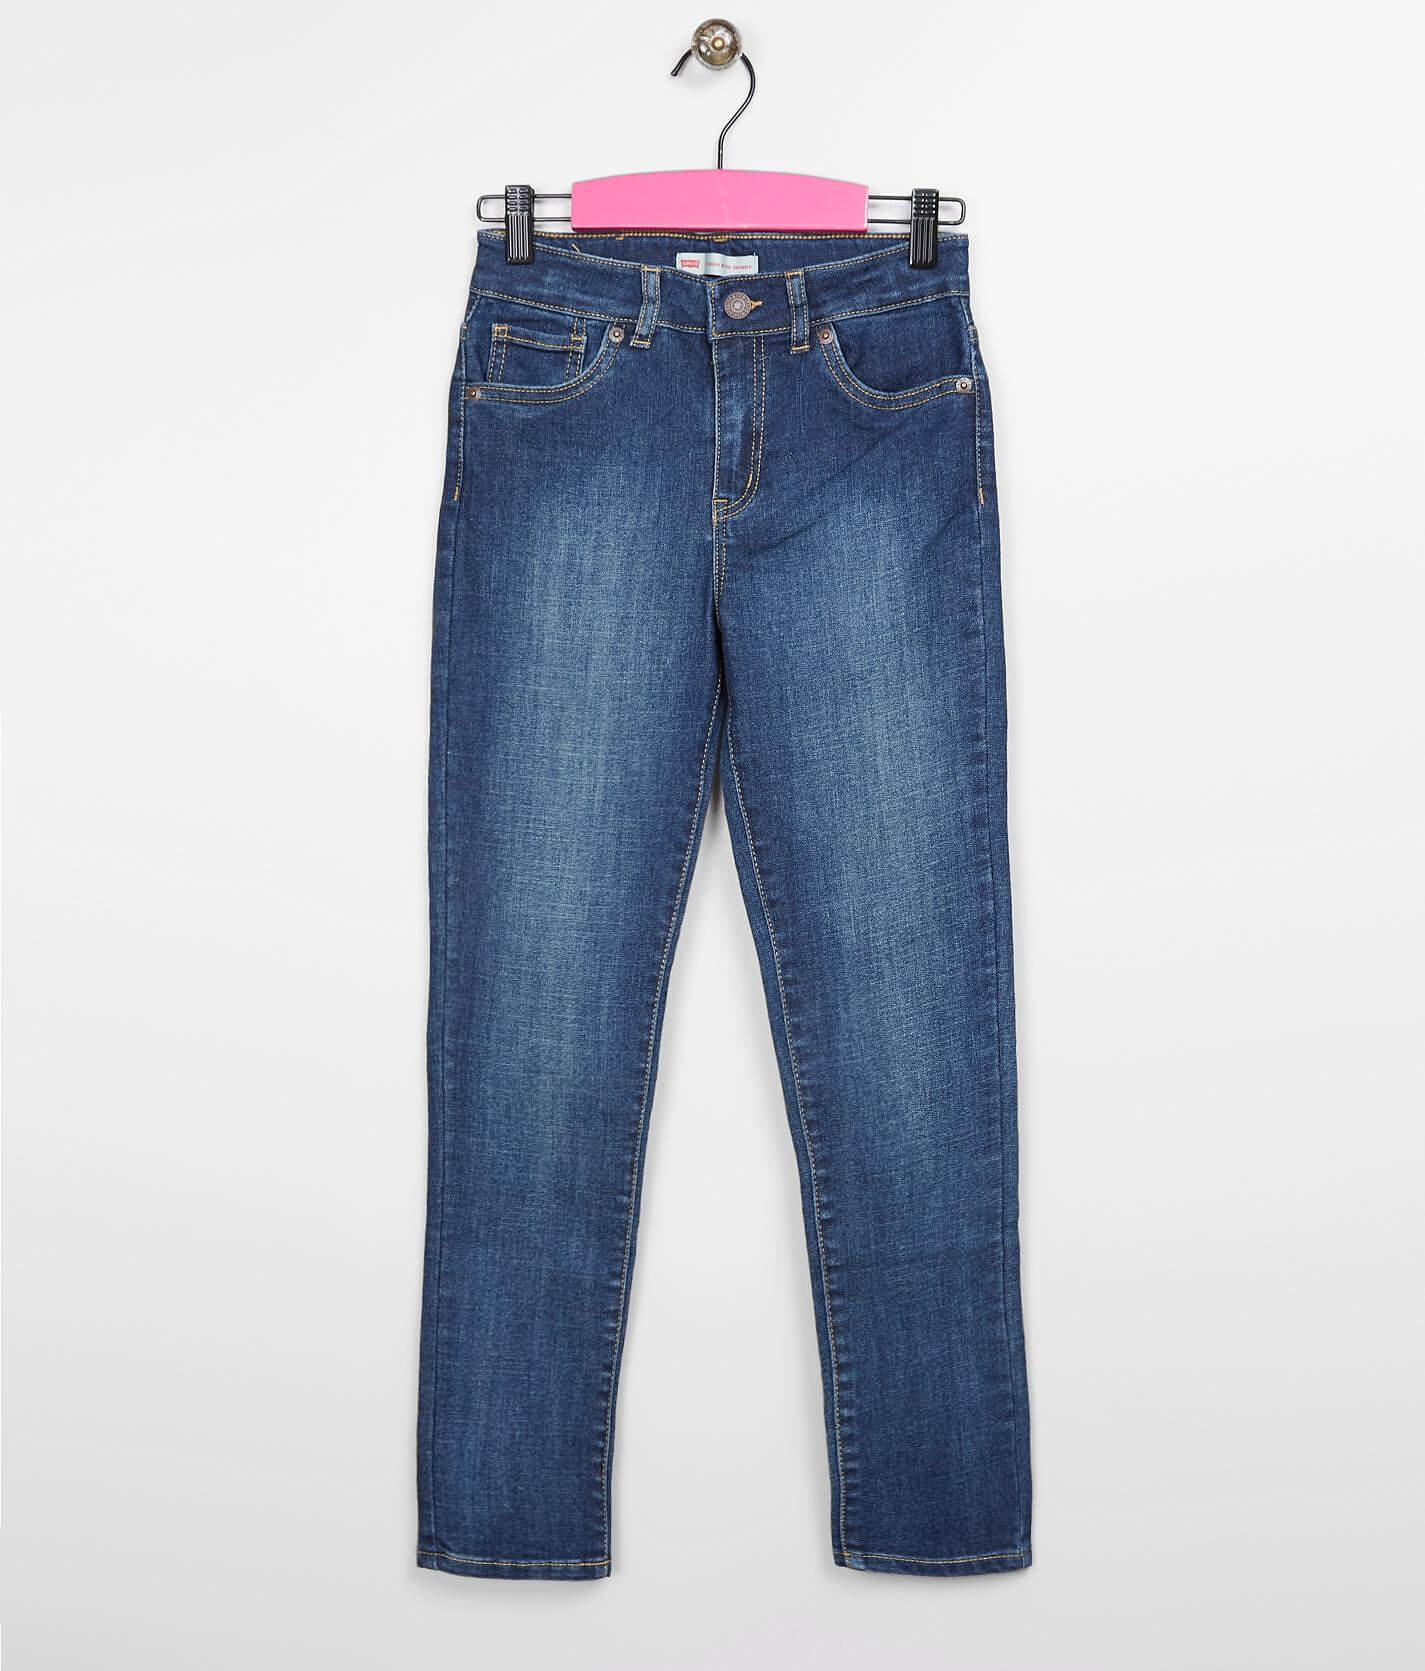 buckle jeans for girls